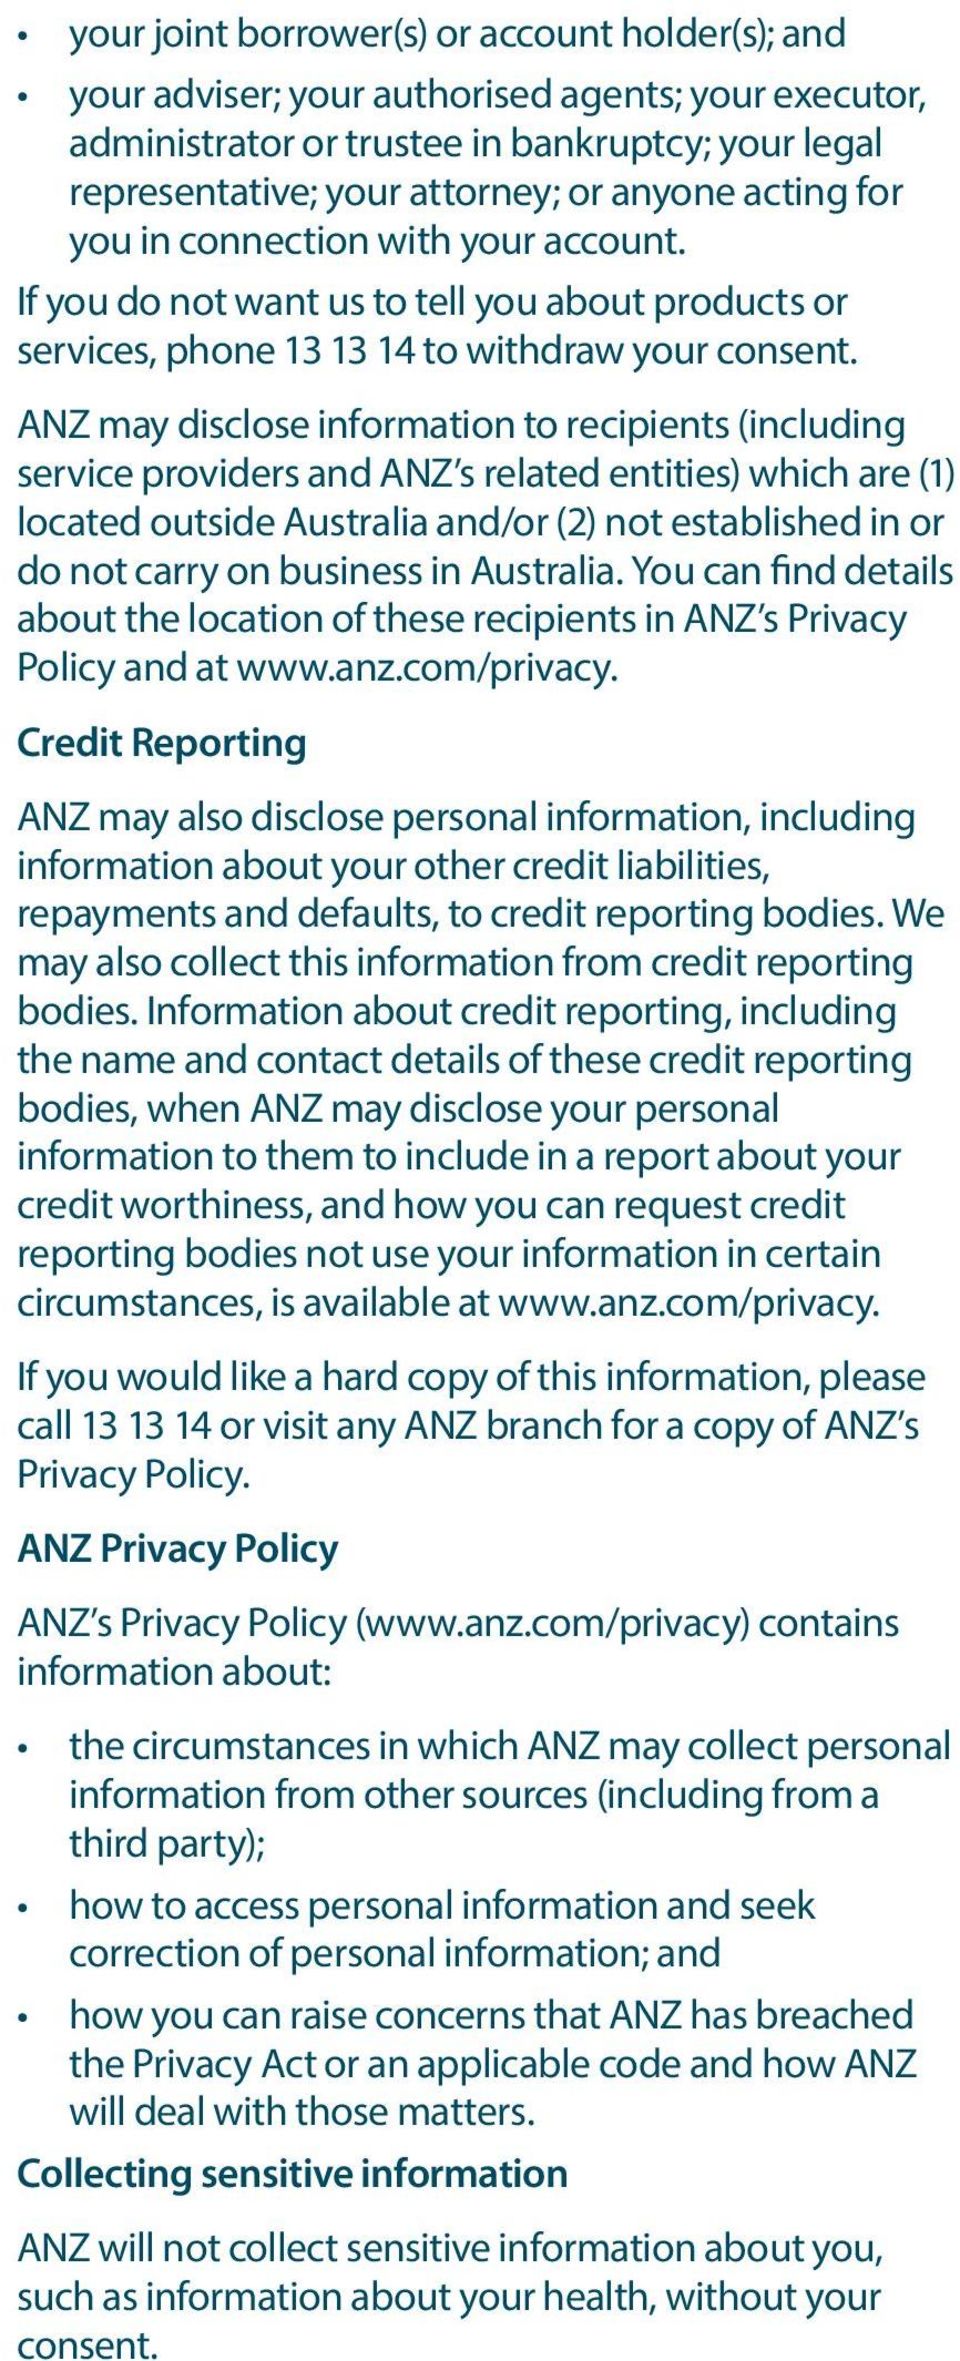 ANZ may disclose information to recipients (including service providers and ANZ s related entities) which are (1) located outside Australia and/or (2) not established in or do not carry on business